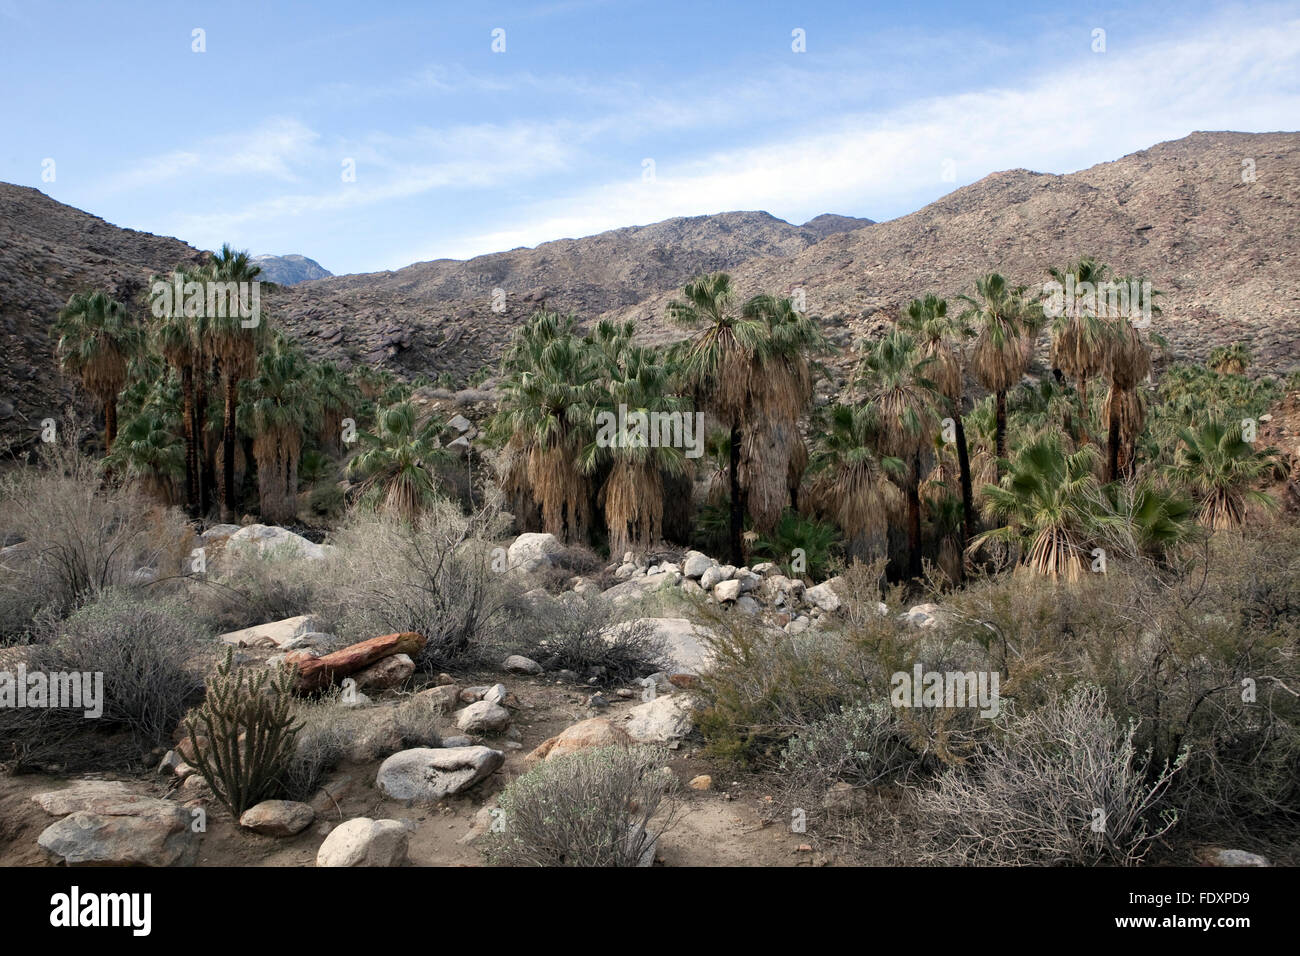 A view of Indian Canyons in Palm Springs, California Stock Photo